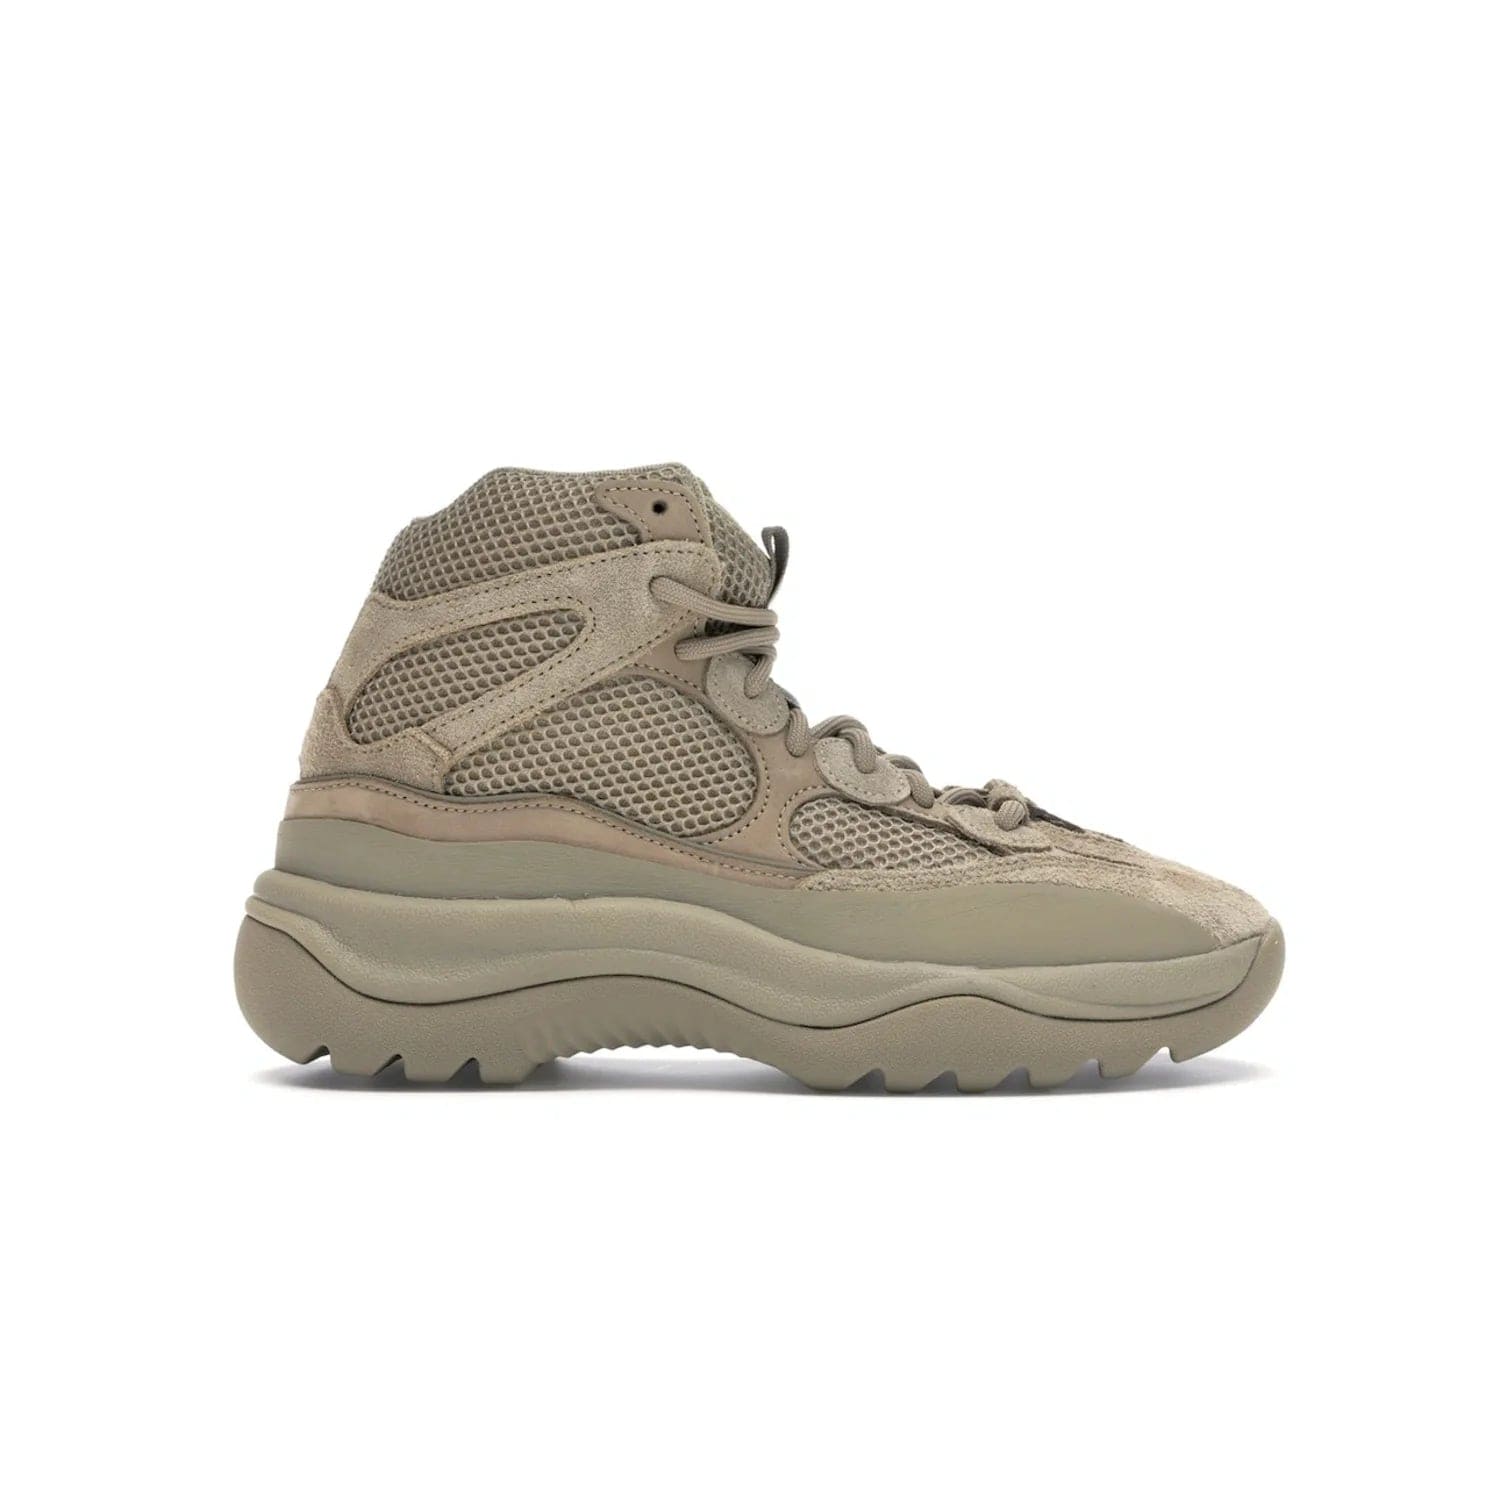 adidas Yeezy Desert Boot Rock - Image 1 - Only at www.BallersClubKickz.com - #
This season, make a fashion statement with the adidas Yeezy Desert Boot Rock. Nubuck and suede upper offers tonal style while the grooved sole provides traction and stability. Get yours in April 2019.